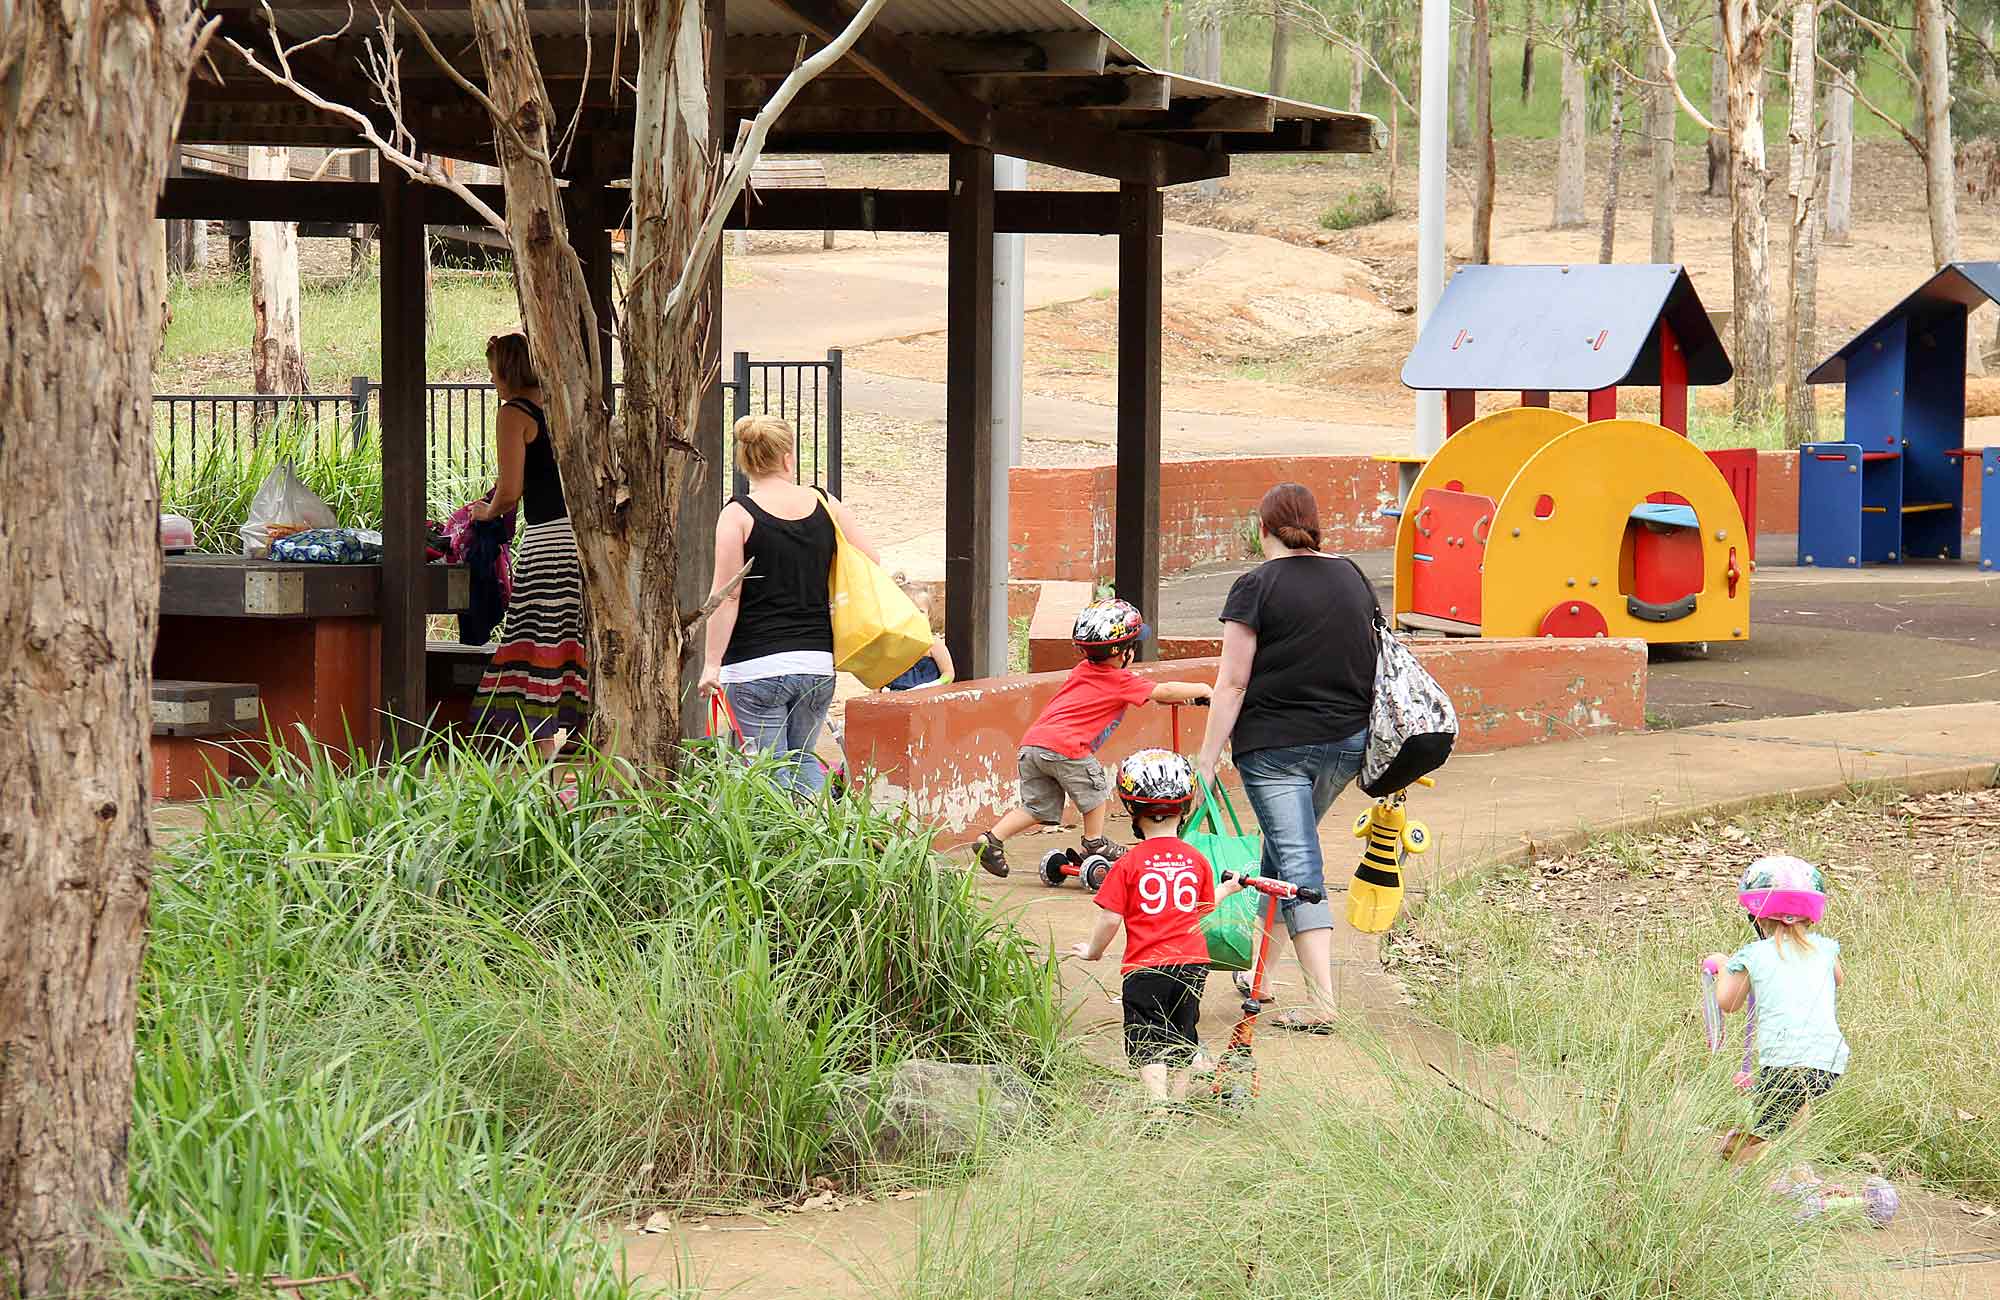 Rouse Hill Picnic Area and Playground, Rouse Hill Regional Park. Photo: John Yurasek